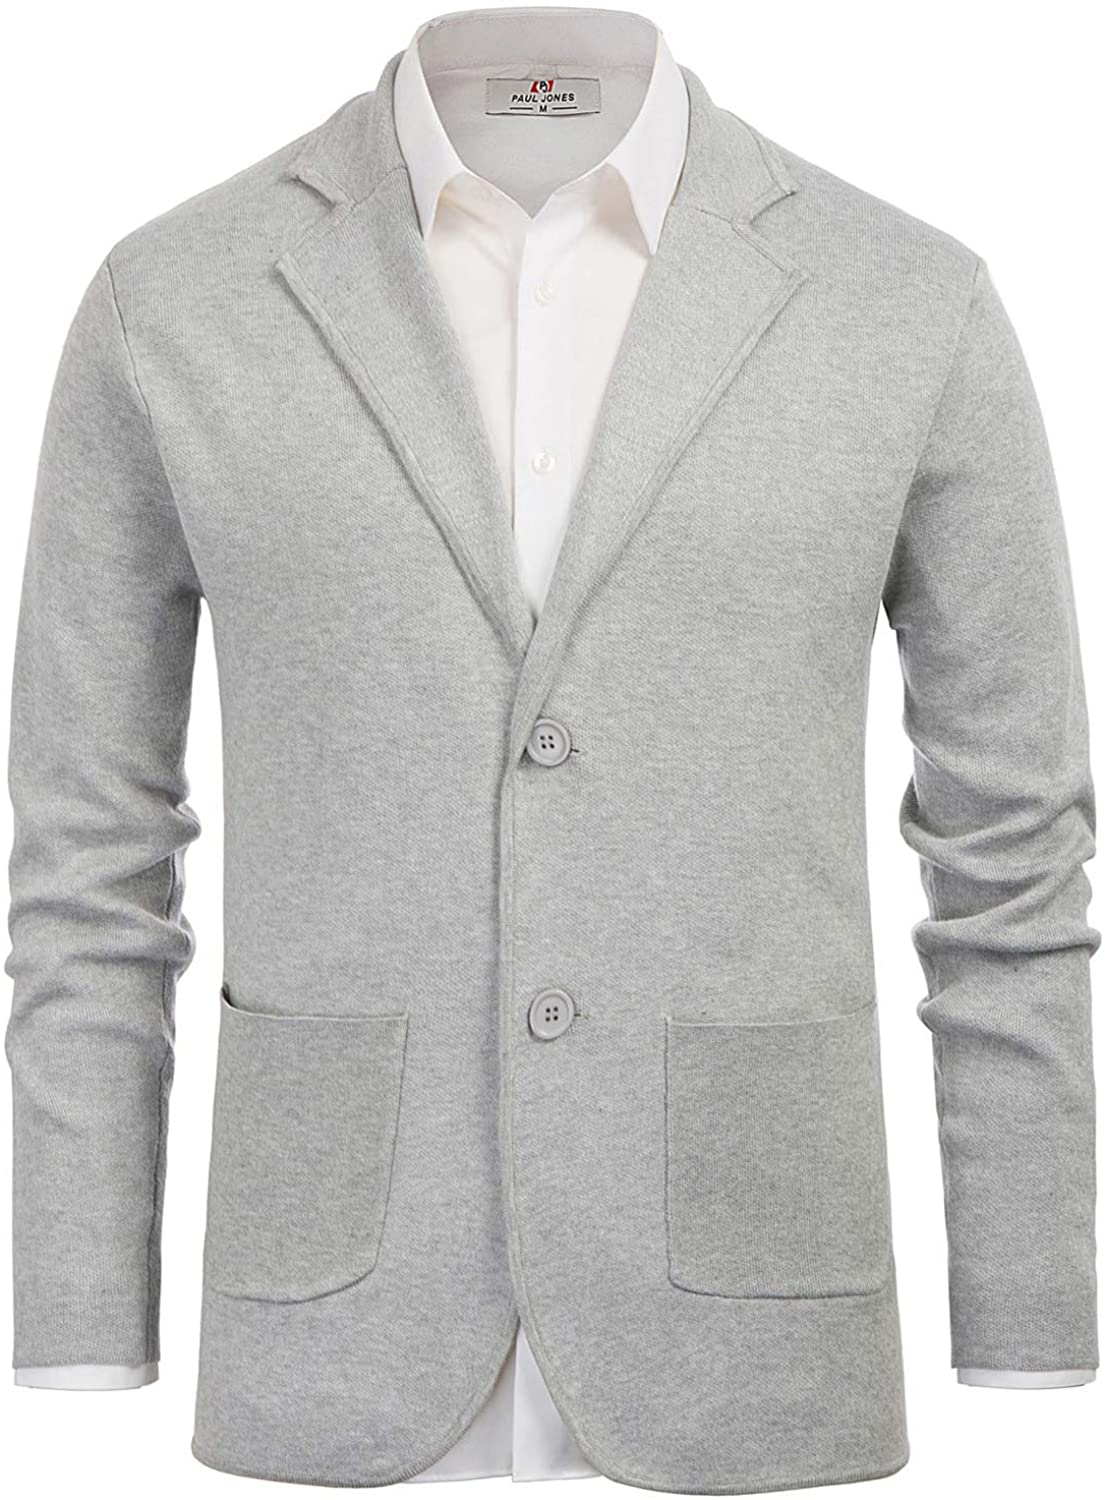 PJ PAUL JONES Men's Shawl Collar Cardigan Sweaters Cable Knitted Aran Sweater with Buttons 